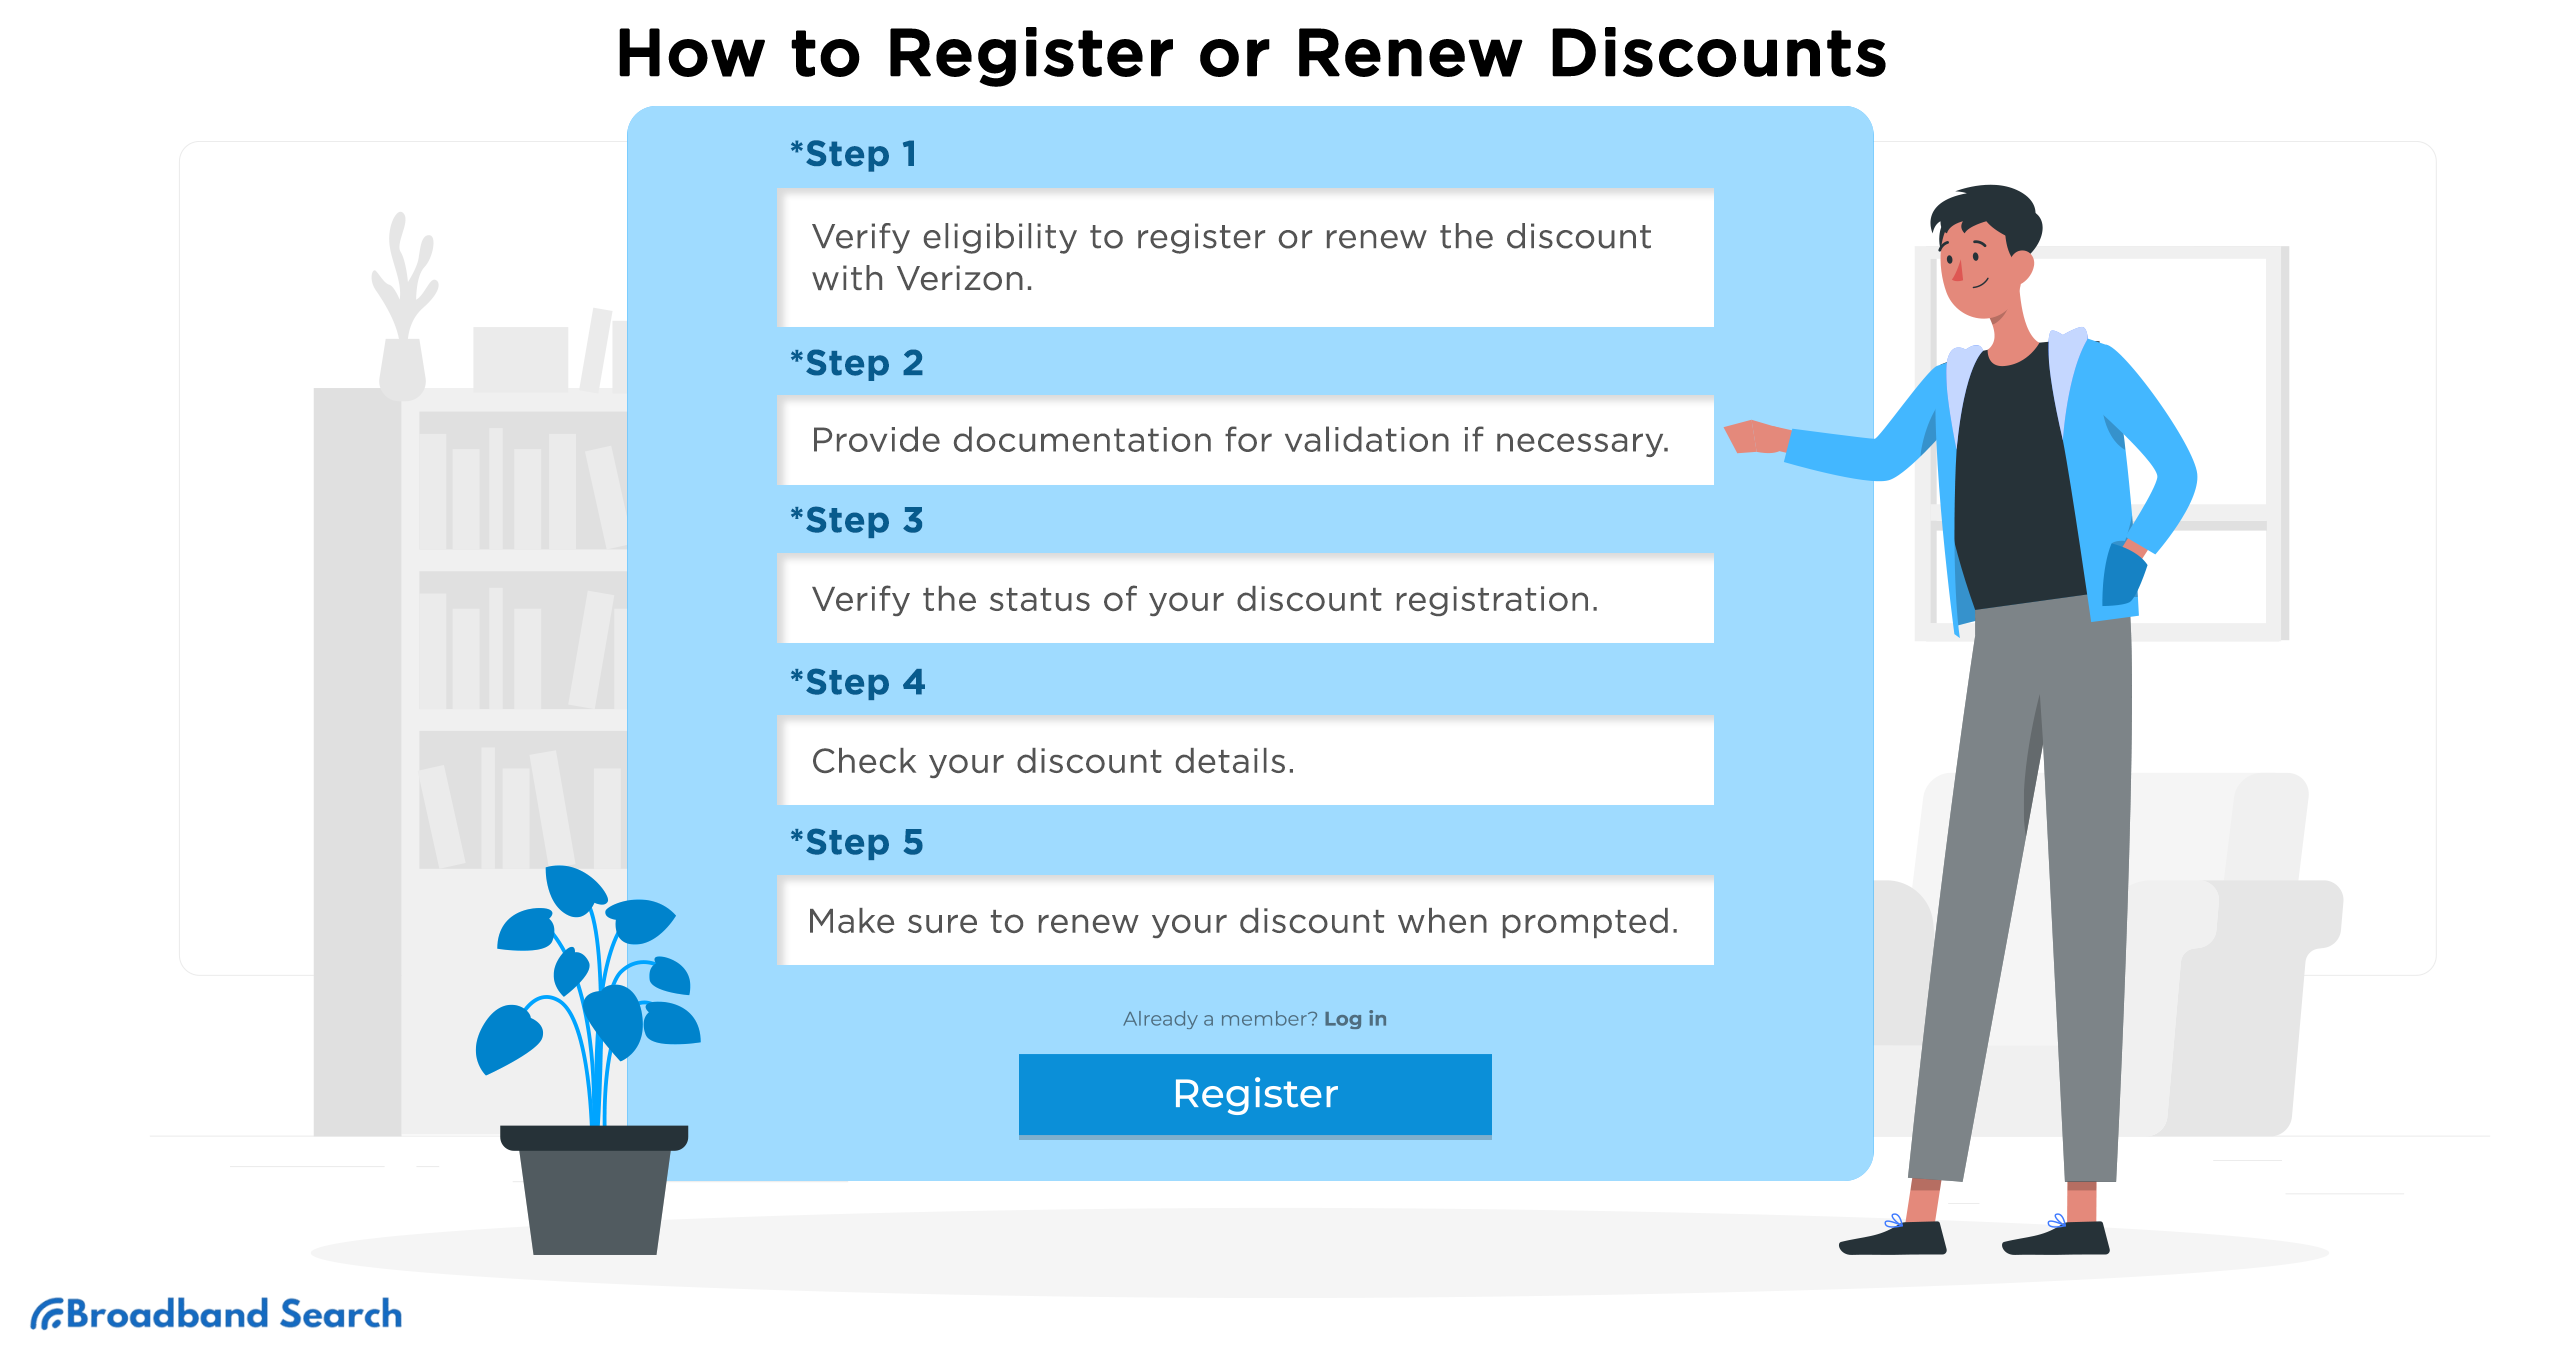 How to Renew or Register Discounts